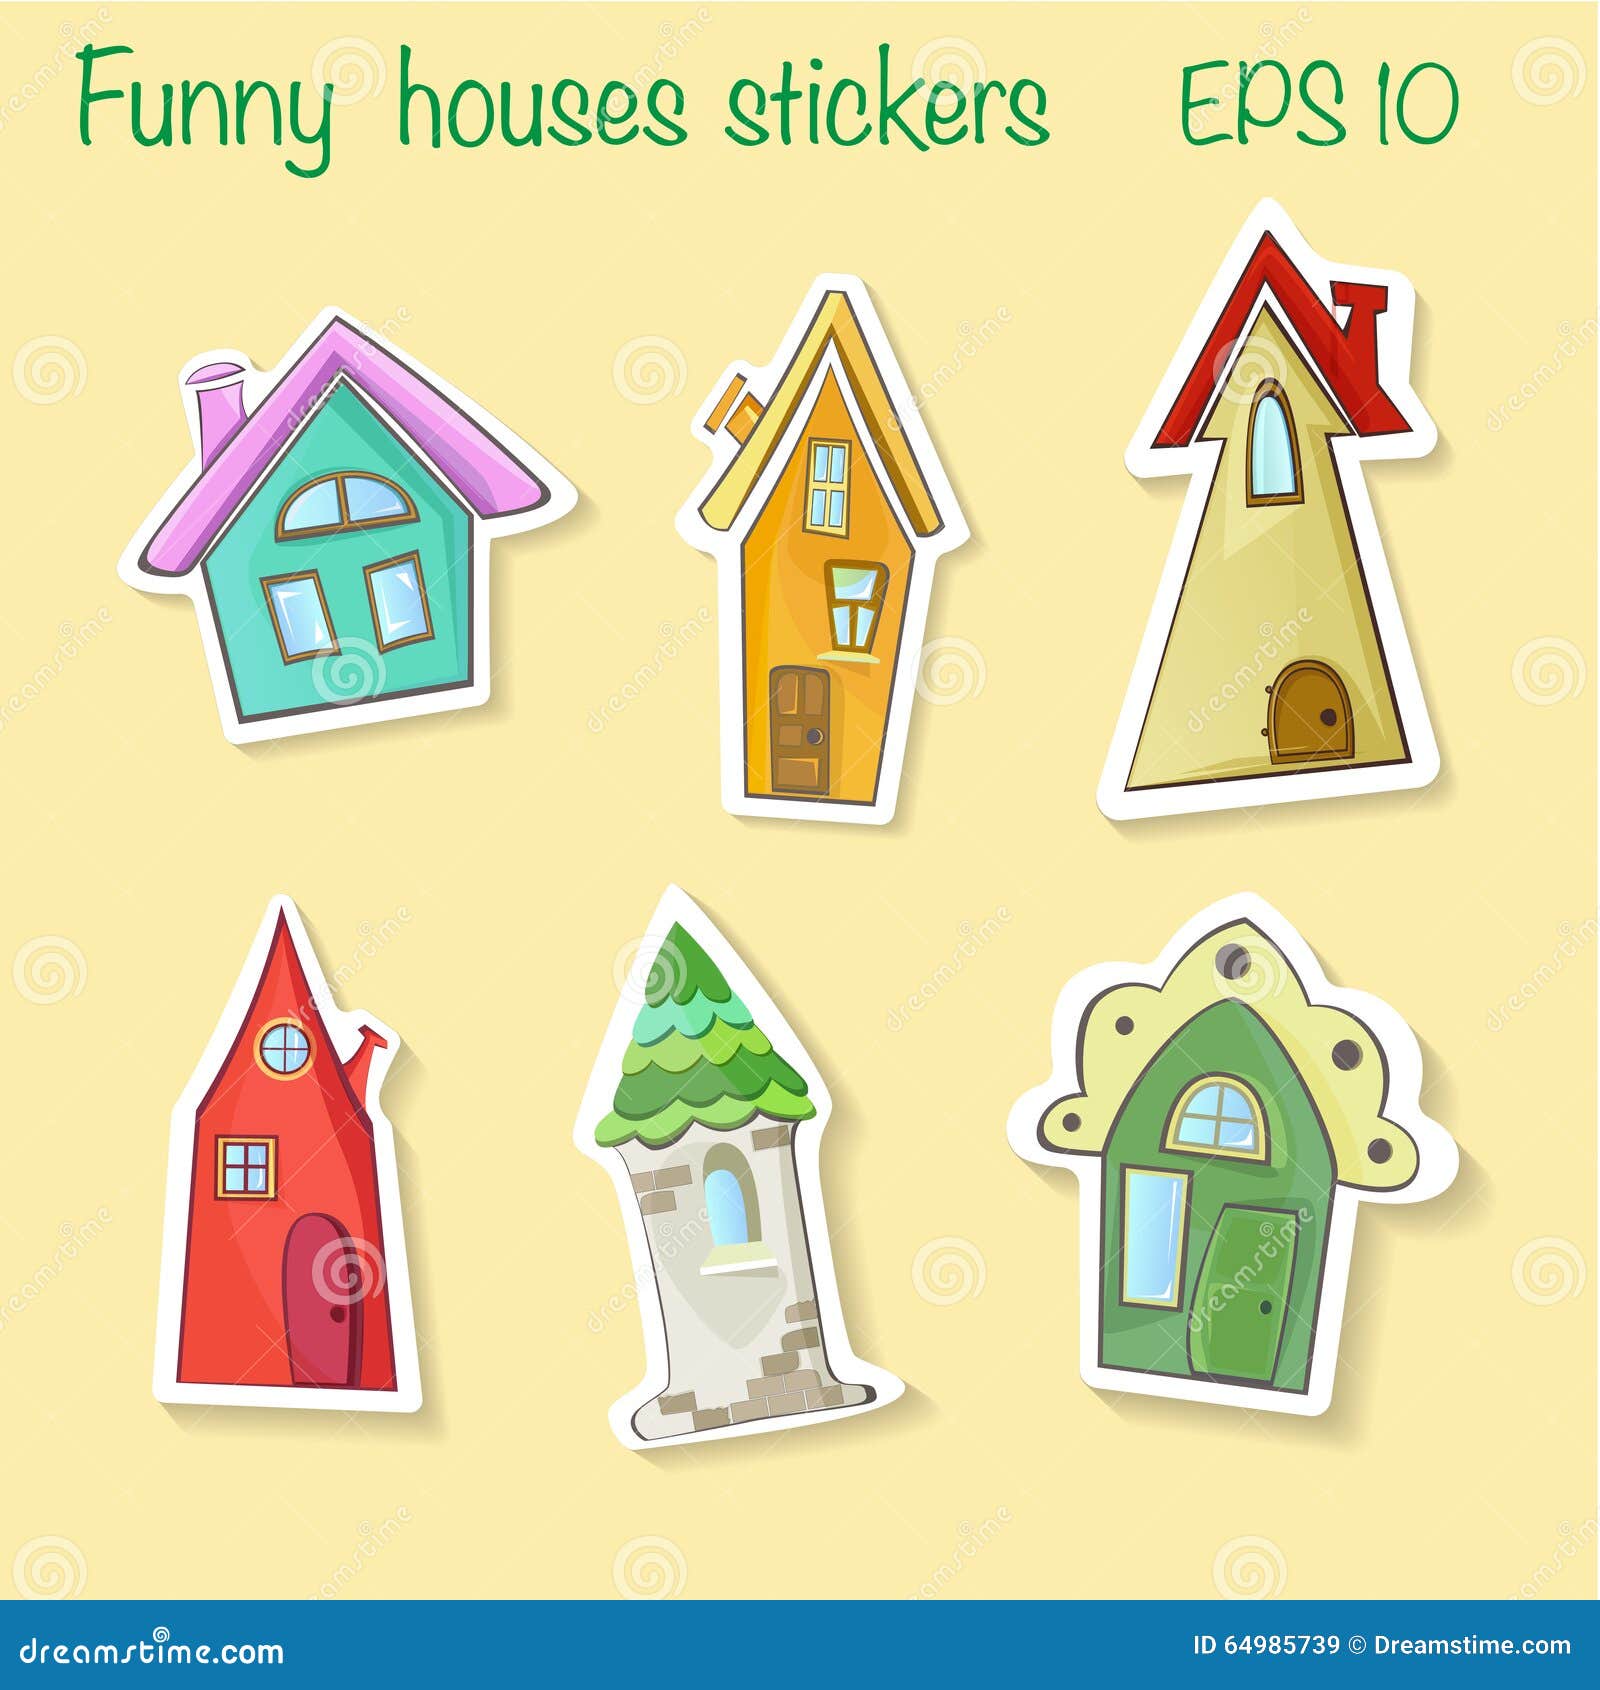 Houses stickers stock illustration. Illustration of funny - 64985739